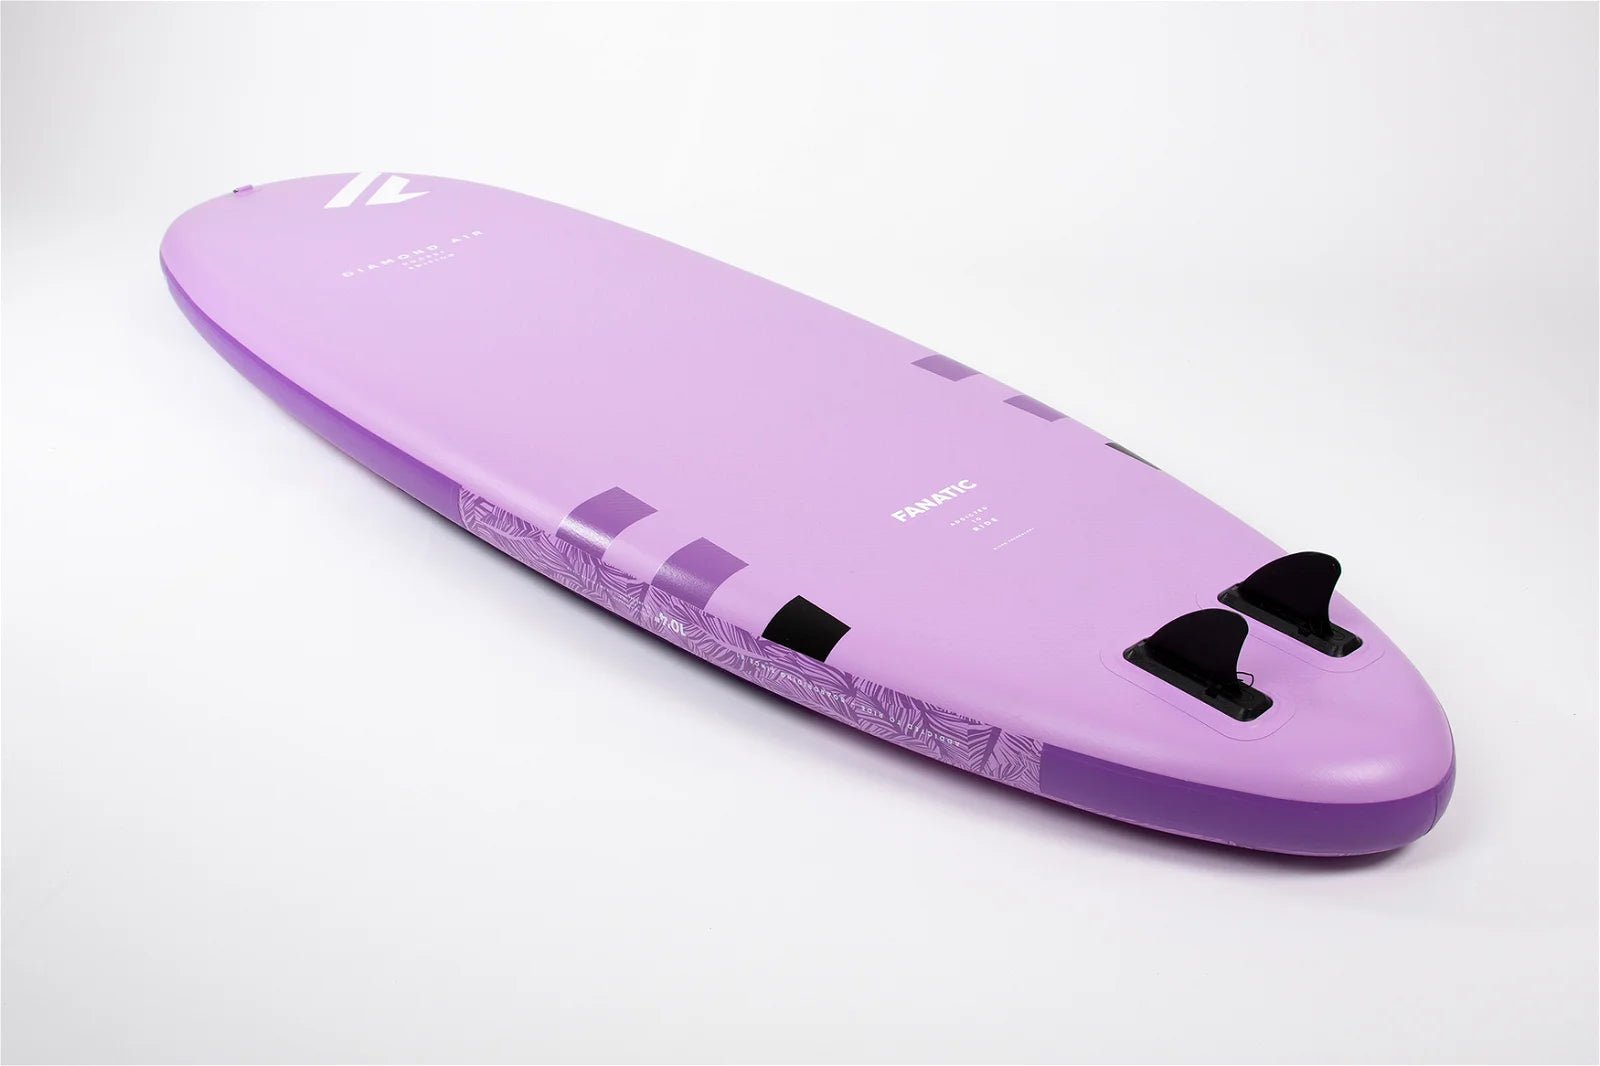 Fanatic Package Lavender Diamond Air Pocket 2022 iSUP Paddleboard - Worthing Watersports - 9010583015774 - iSUP Packages - Fanatic SUP